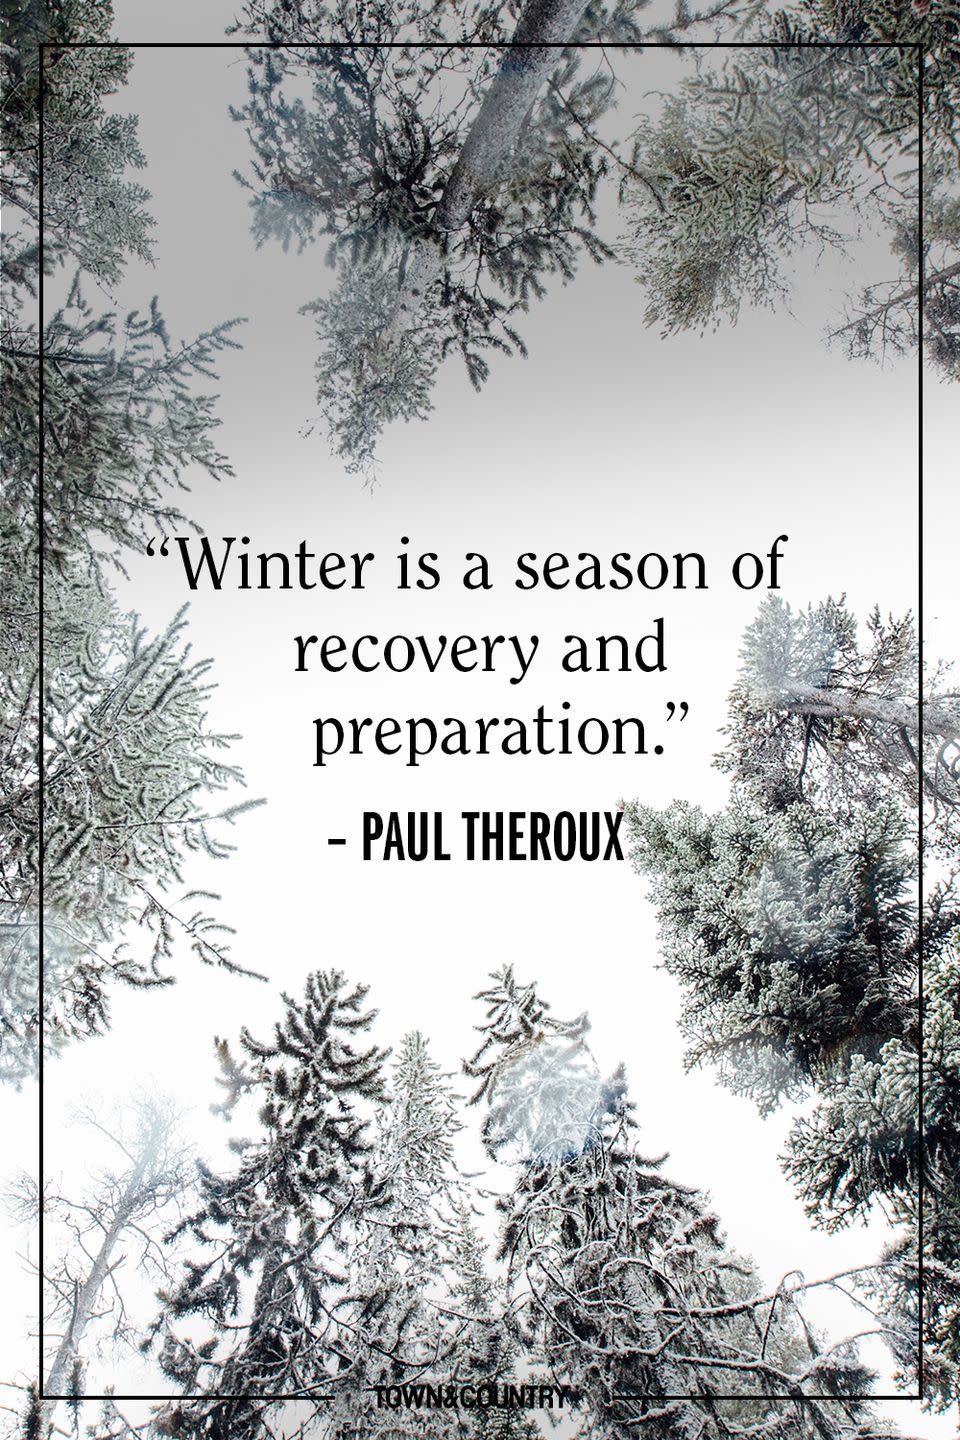 <p>"Winter is a season of recovery and preparation."</p><p><em>– Paul Theroux</em></p>